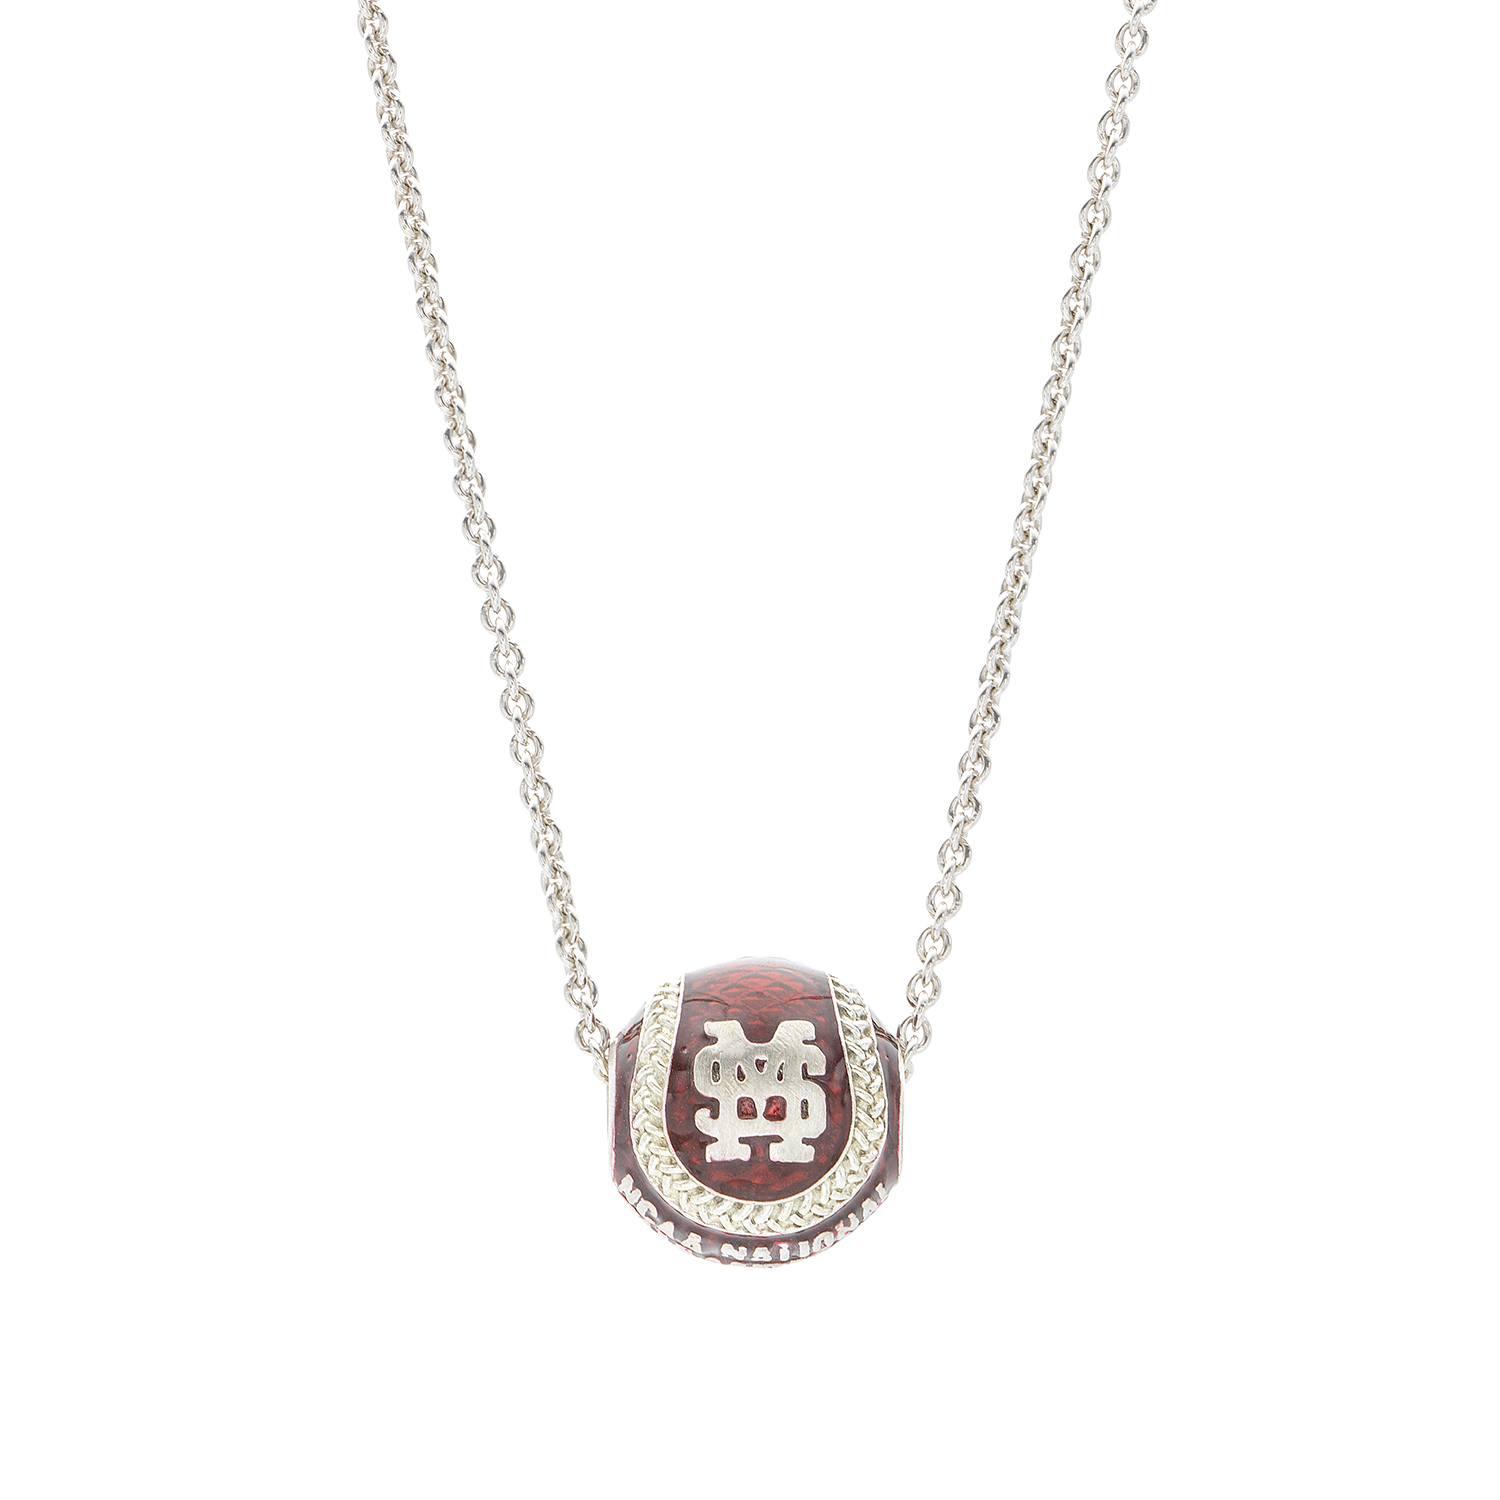 Mississippi State 2021 College World Series Commemorative Baseball Pendant Necklace